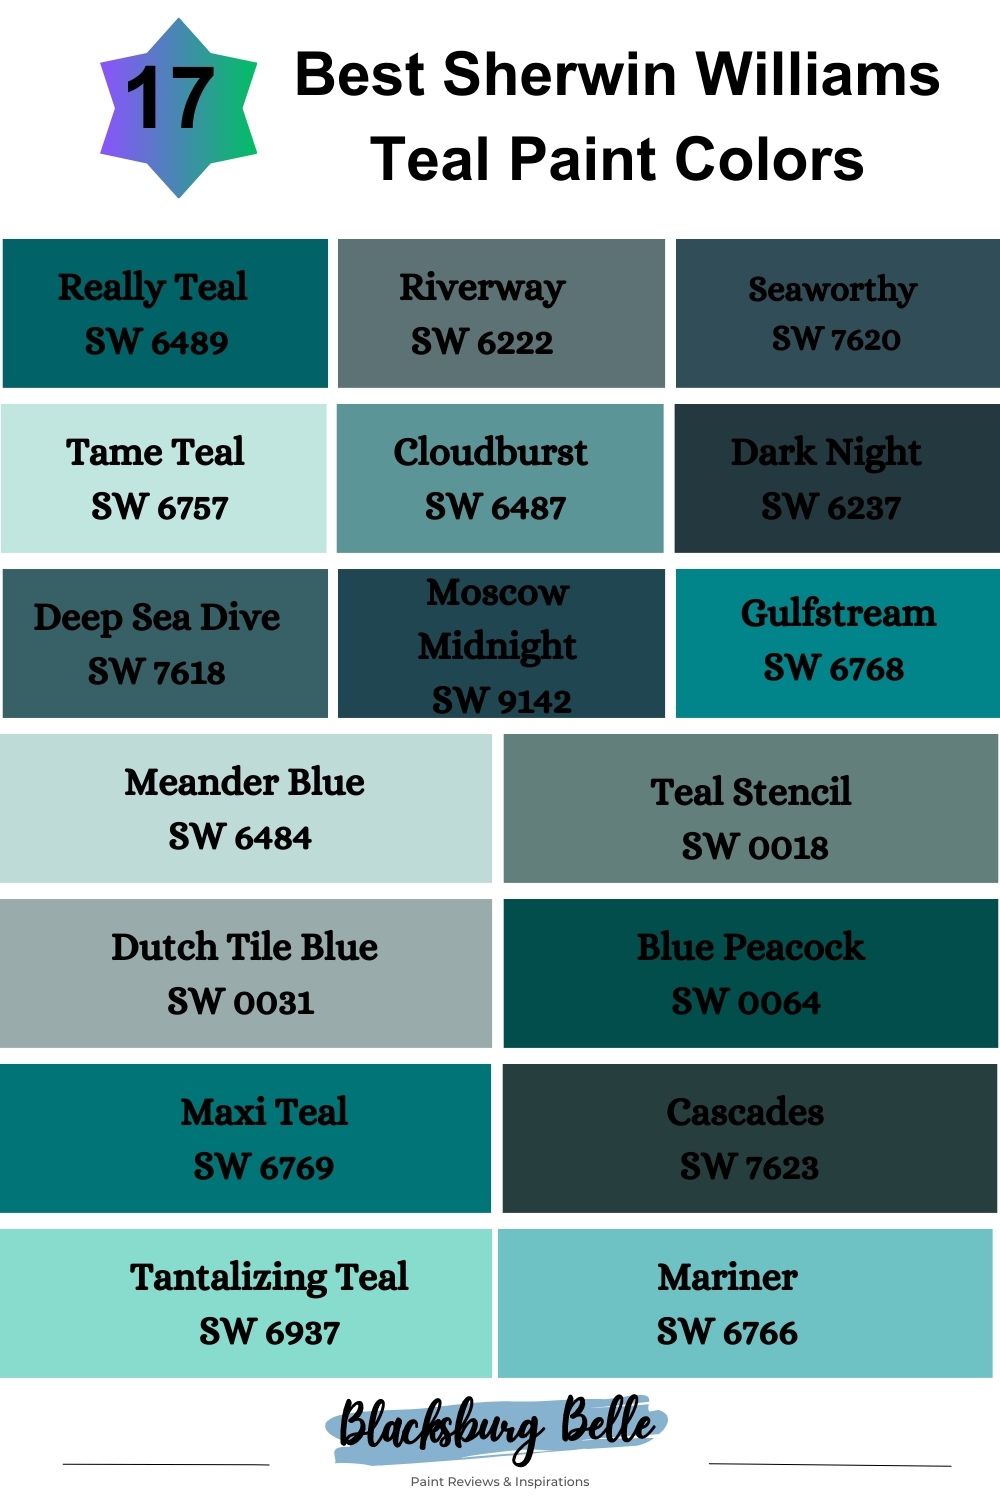 17 Best Sherwin Williams Teal Paint Colors